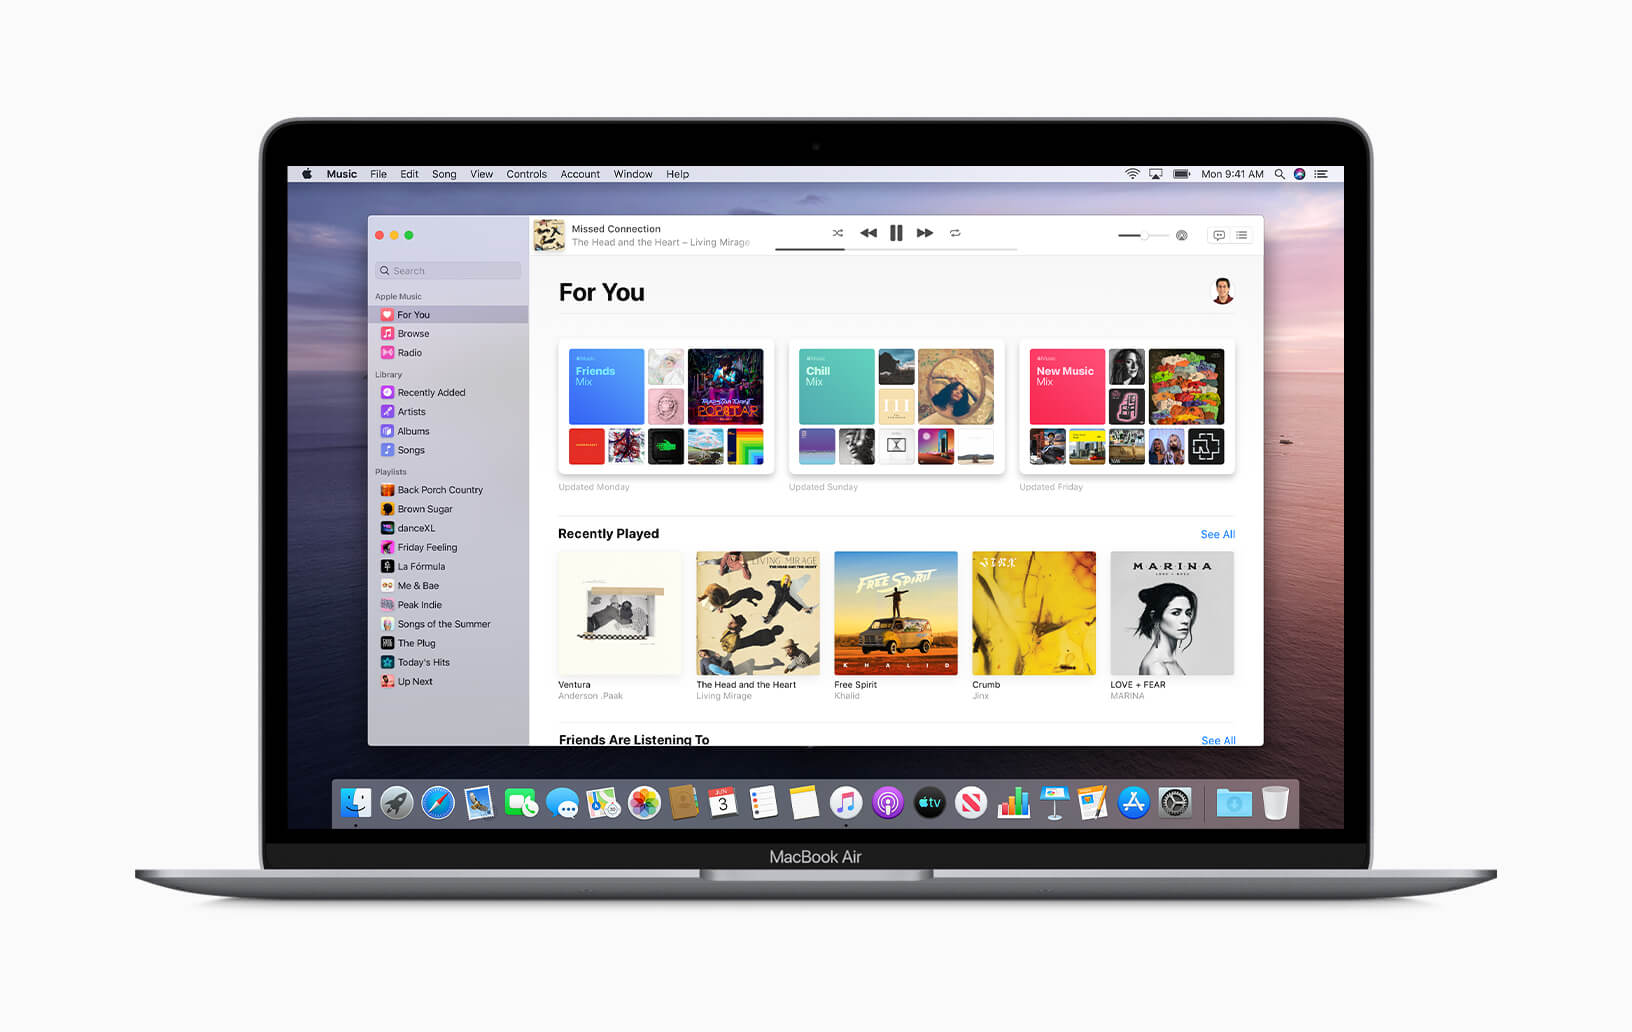 Apple pulls the plug on iTunes with latest macOS update